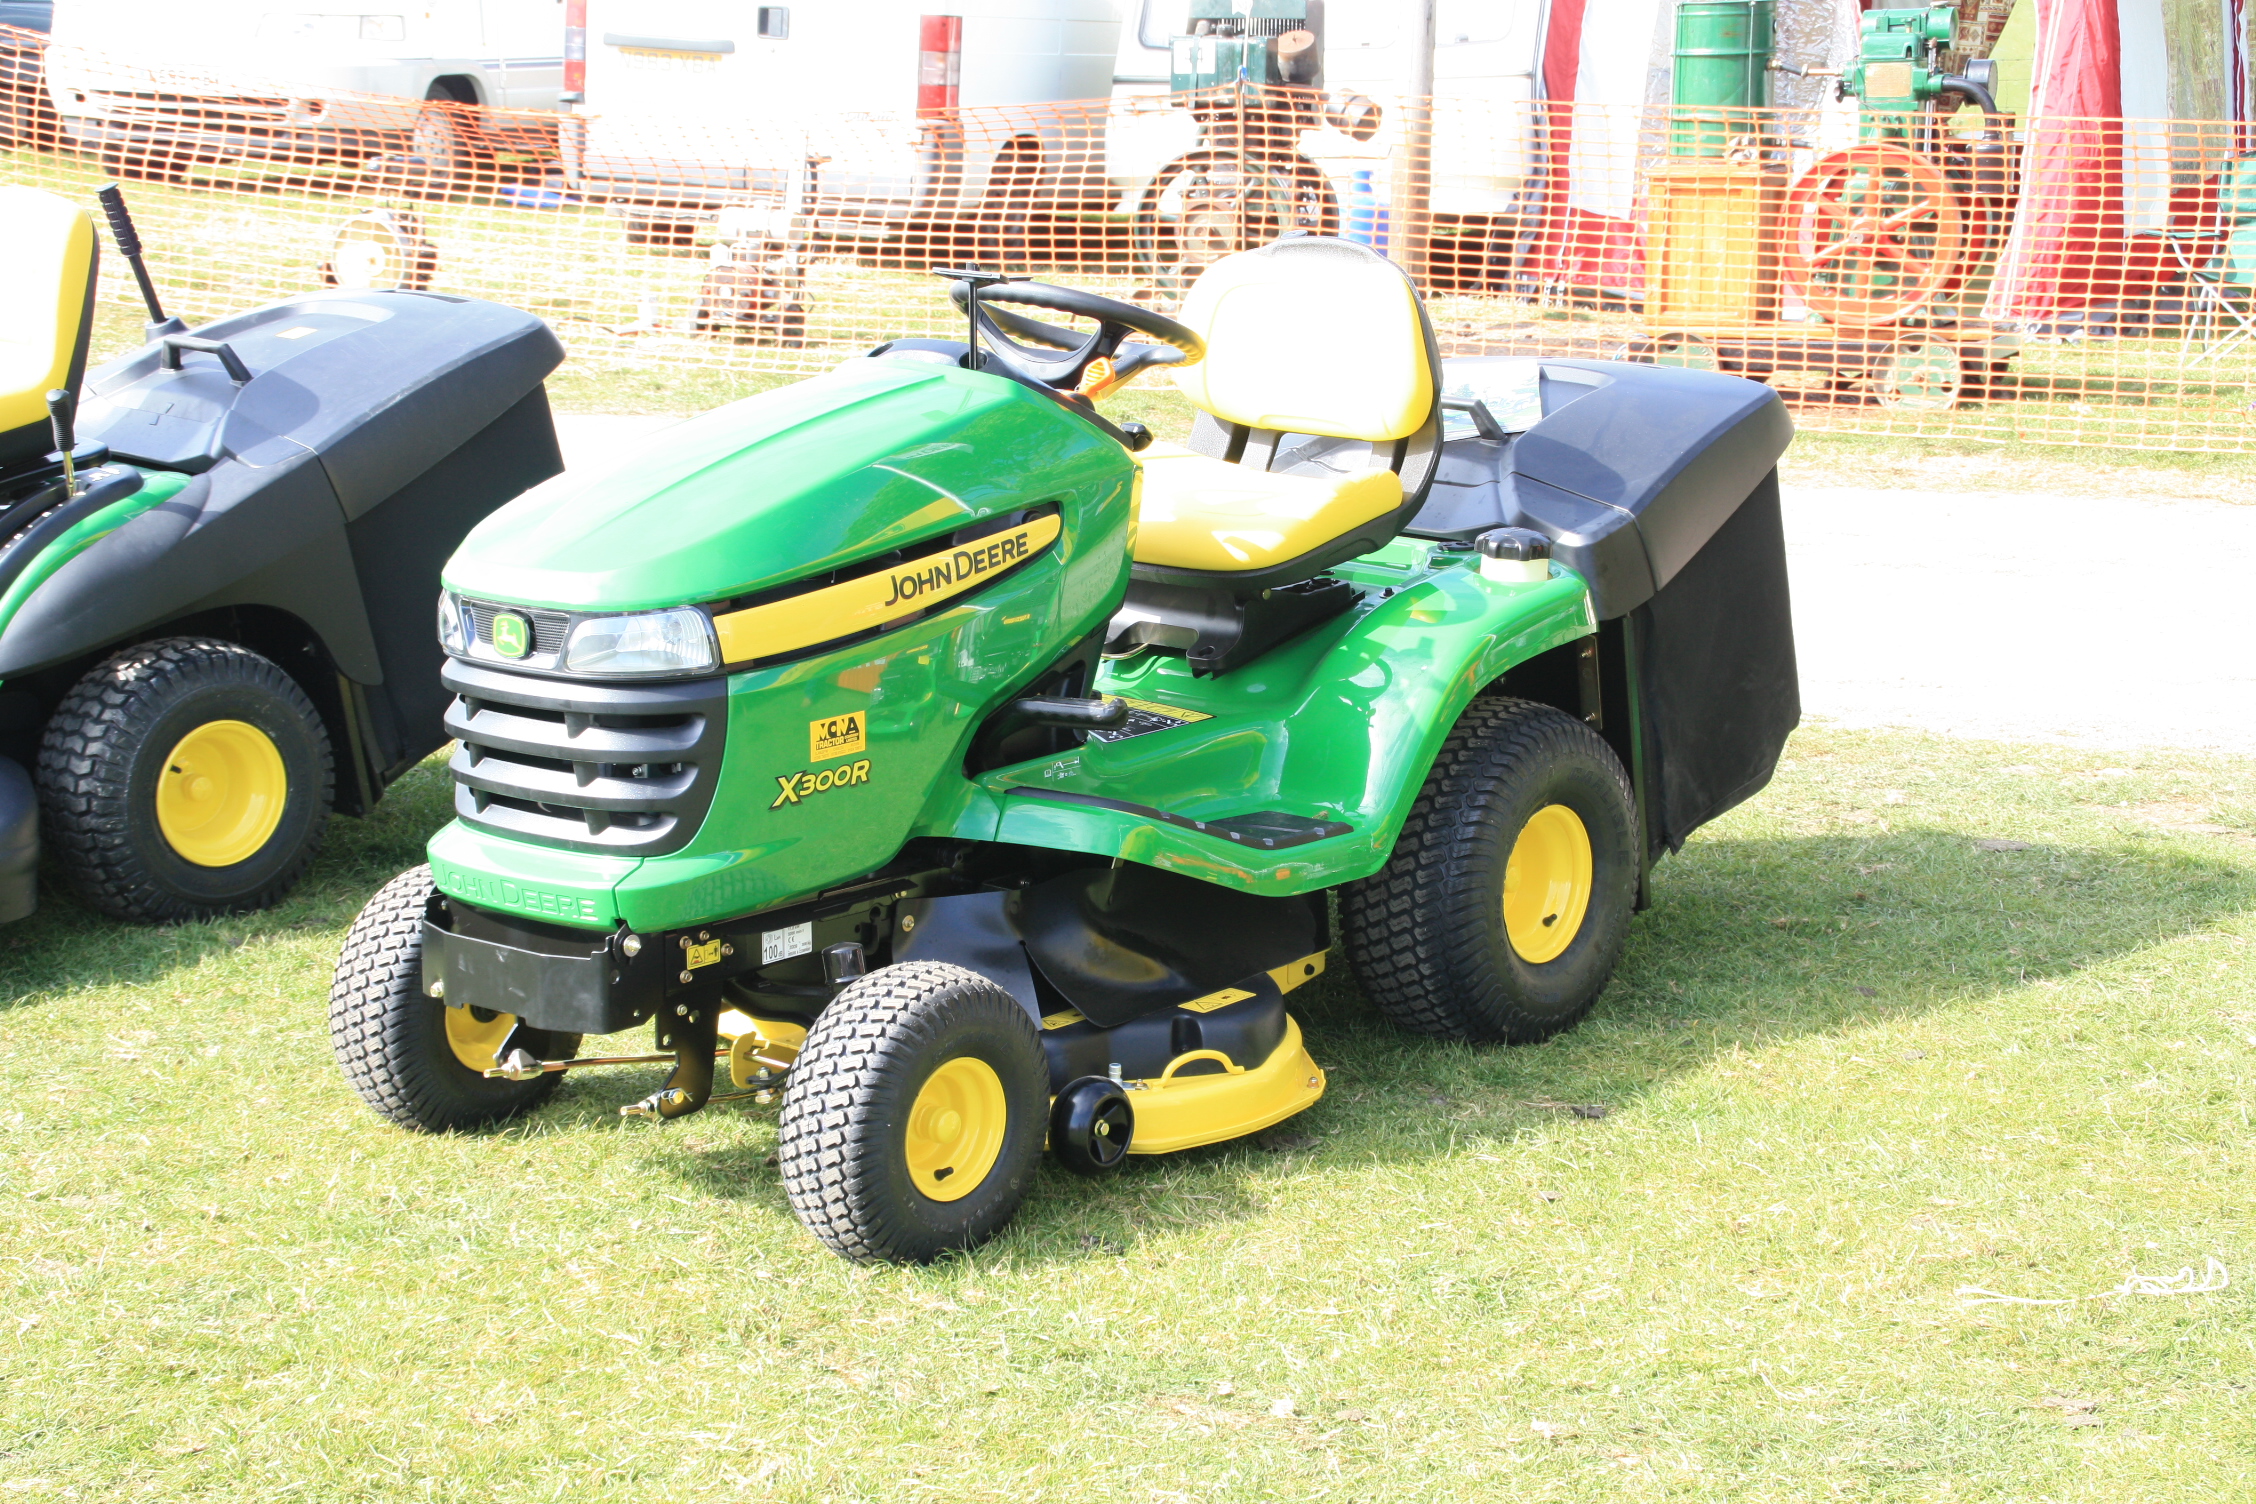 List of John Deere grounds care - Tractor & Construction Plant ...